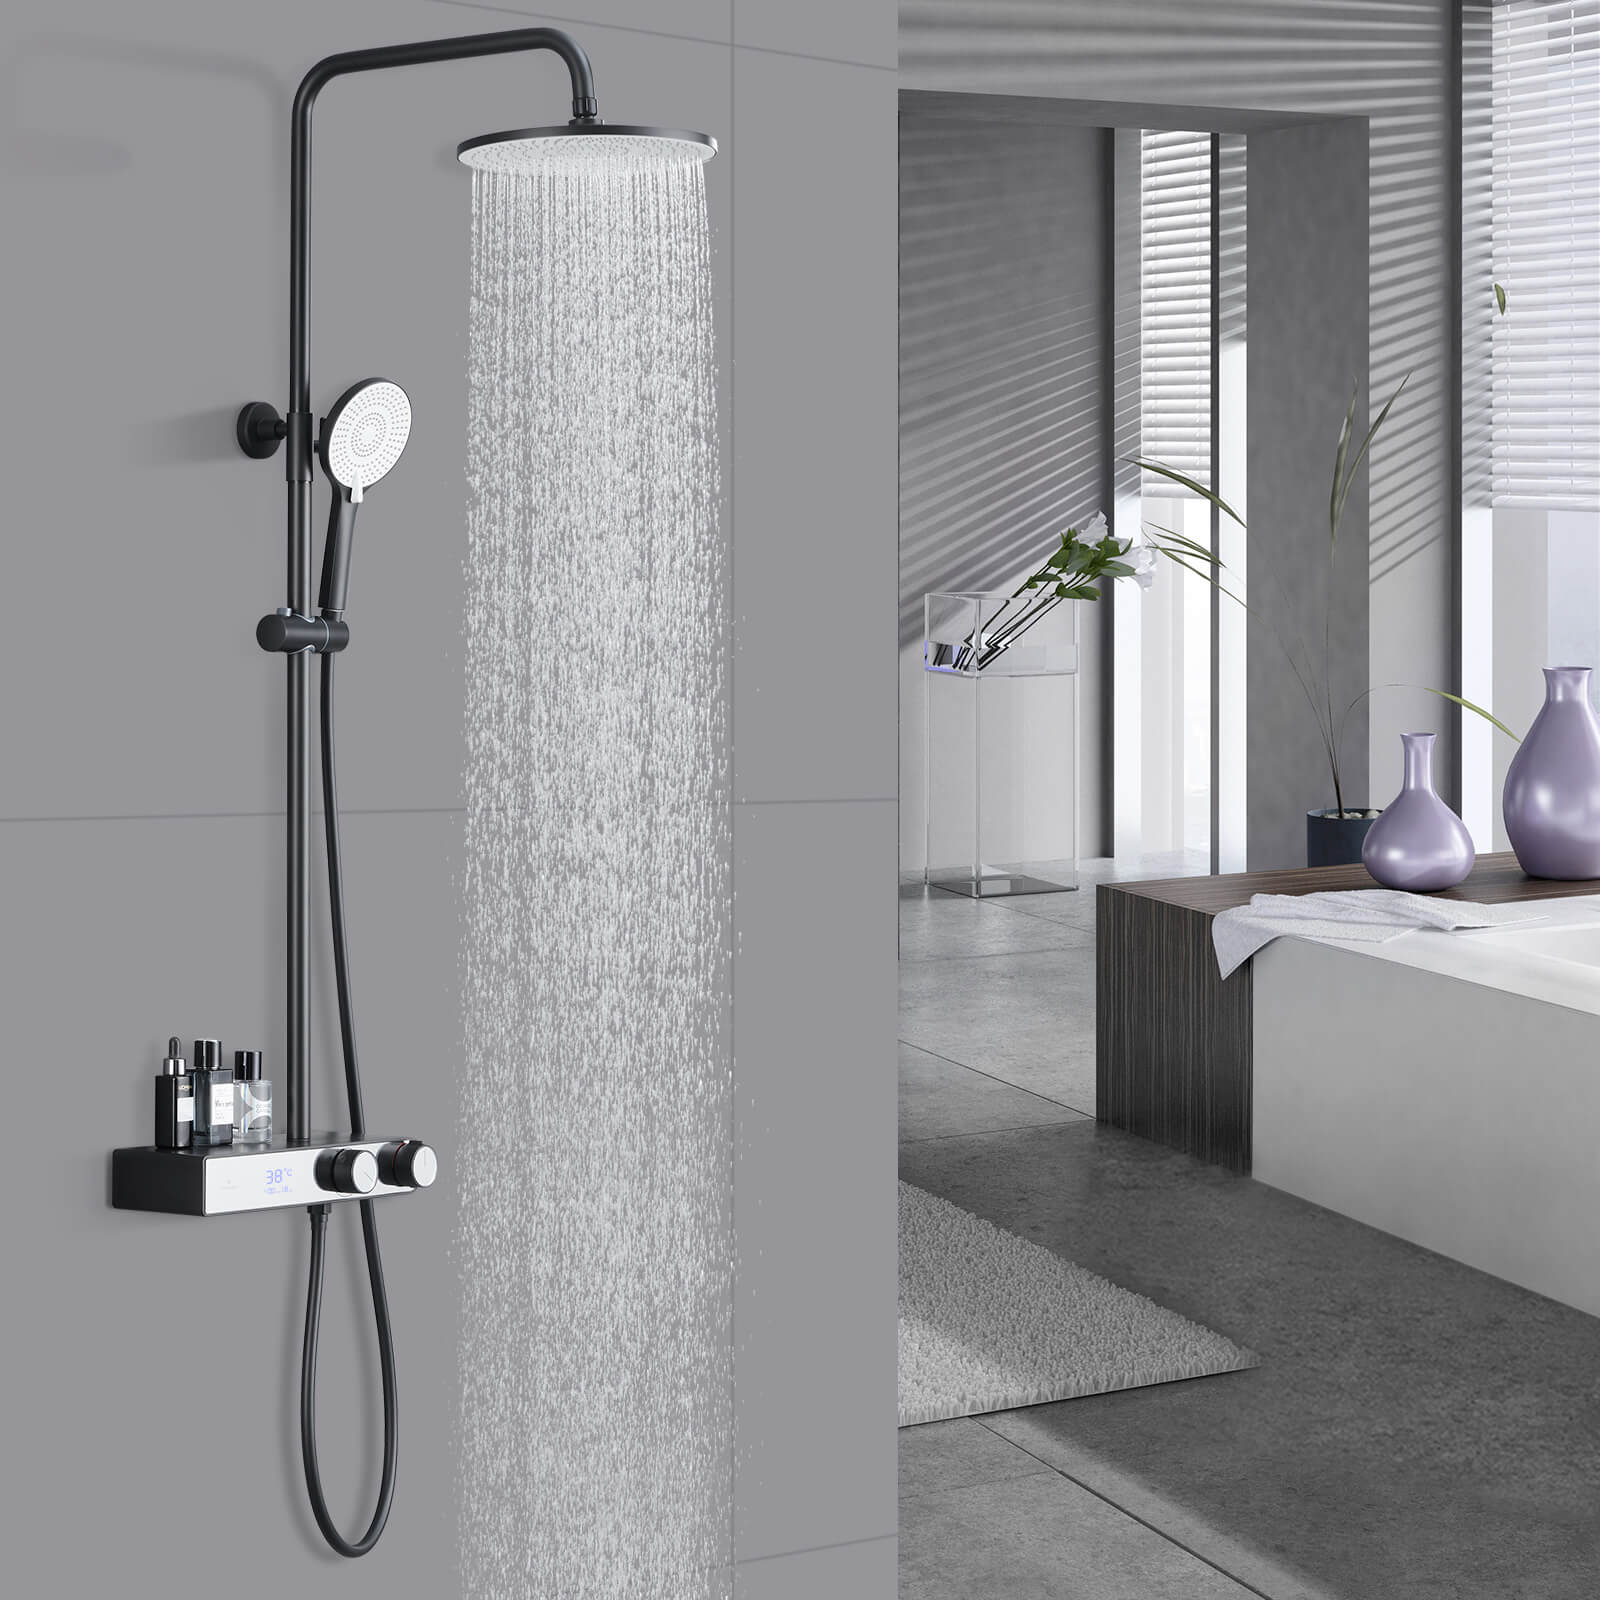 Homelody Shower Column Black with Digital Display LED 3-Mode Shower System Hand Shower and 10in Head Shower